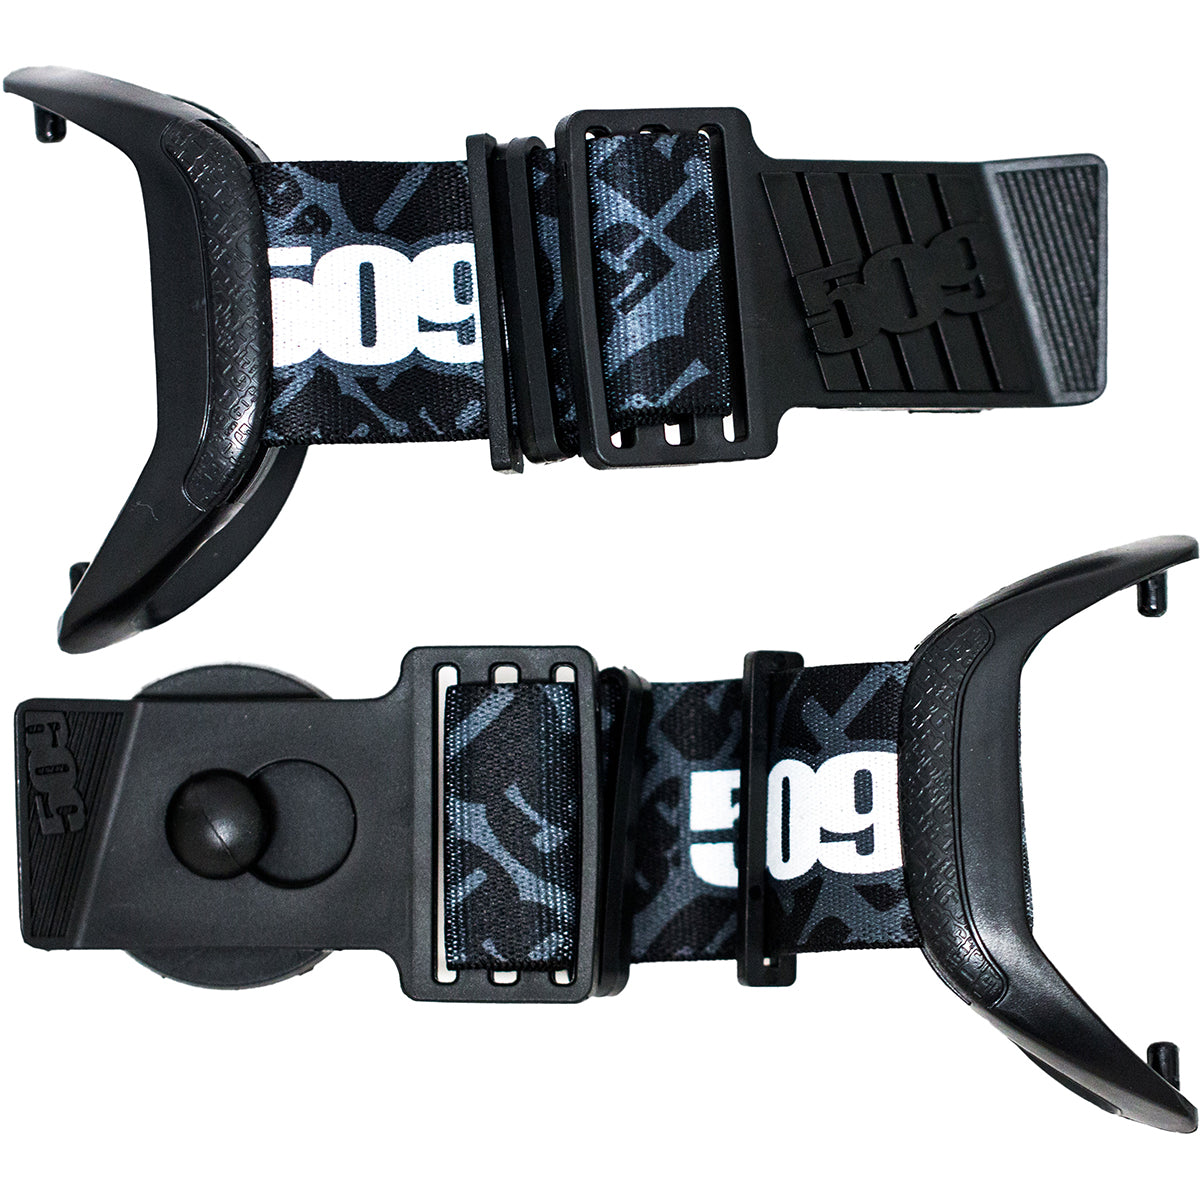 Short Straps for Sinister X5 Goggles